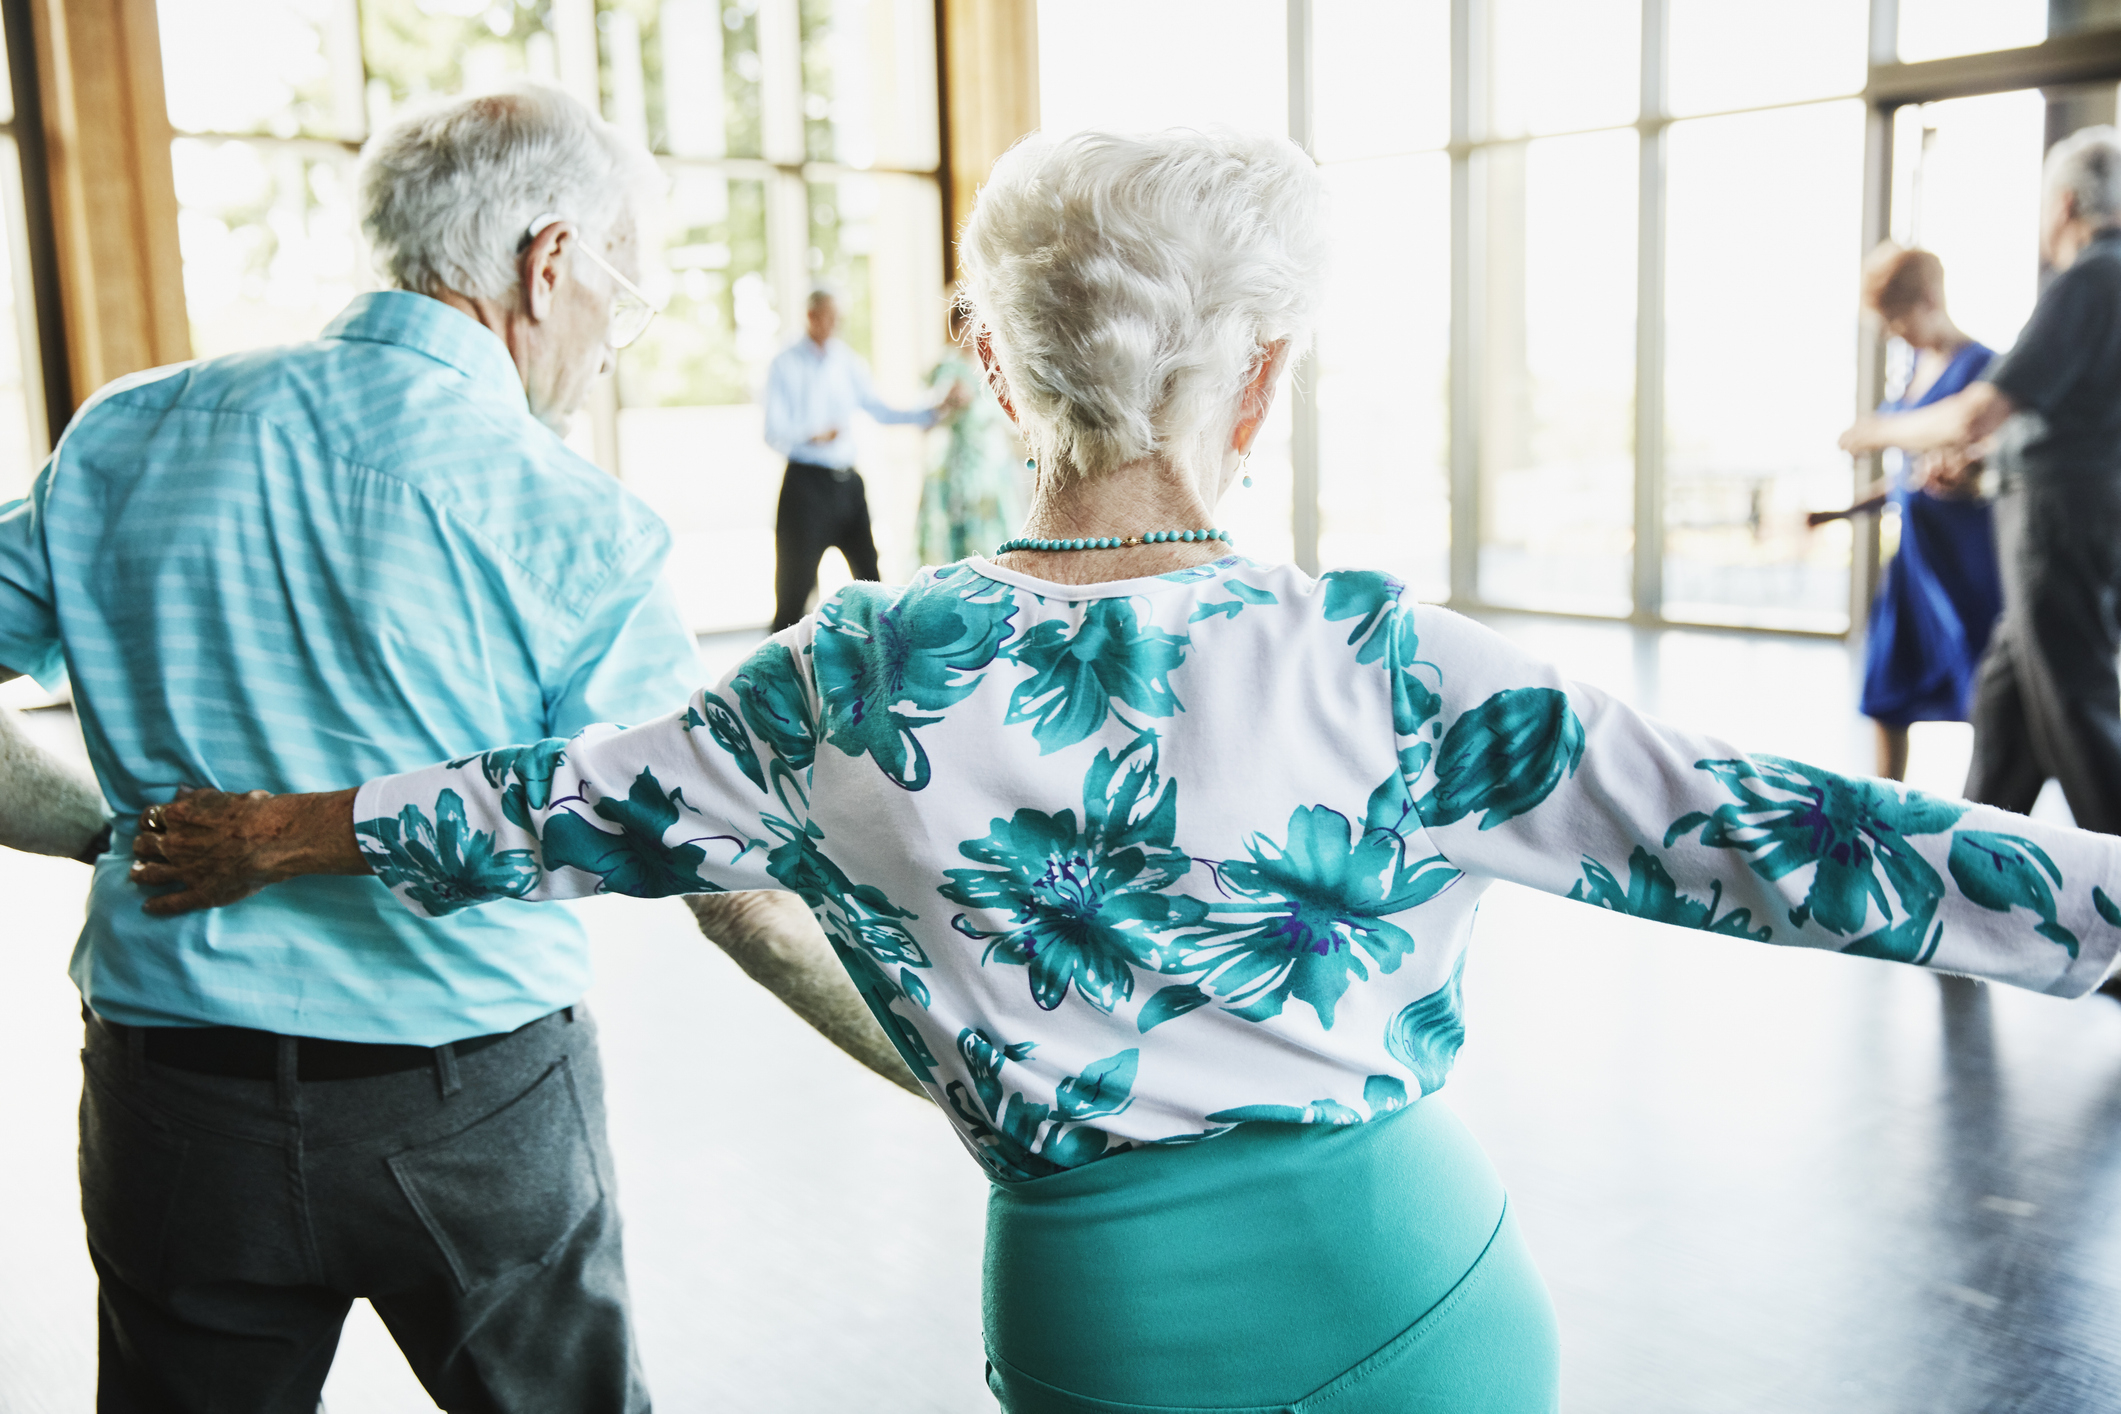 Elderly couple, backs to camera, dancing in a bright room; the woman in a floral top, the man in a light shirt. Other couples dance in the background